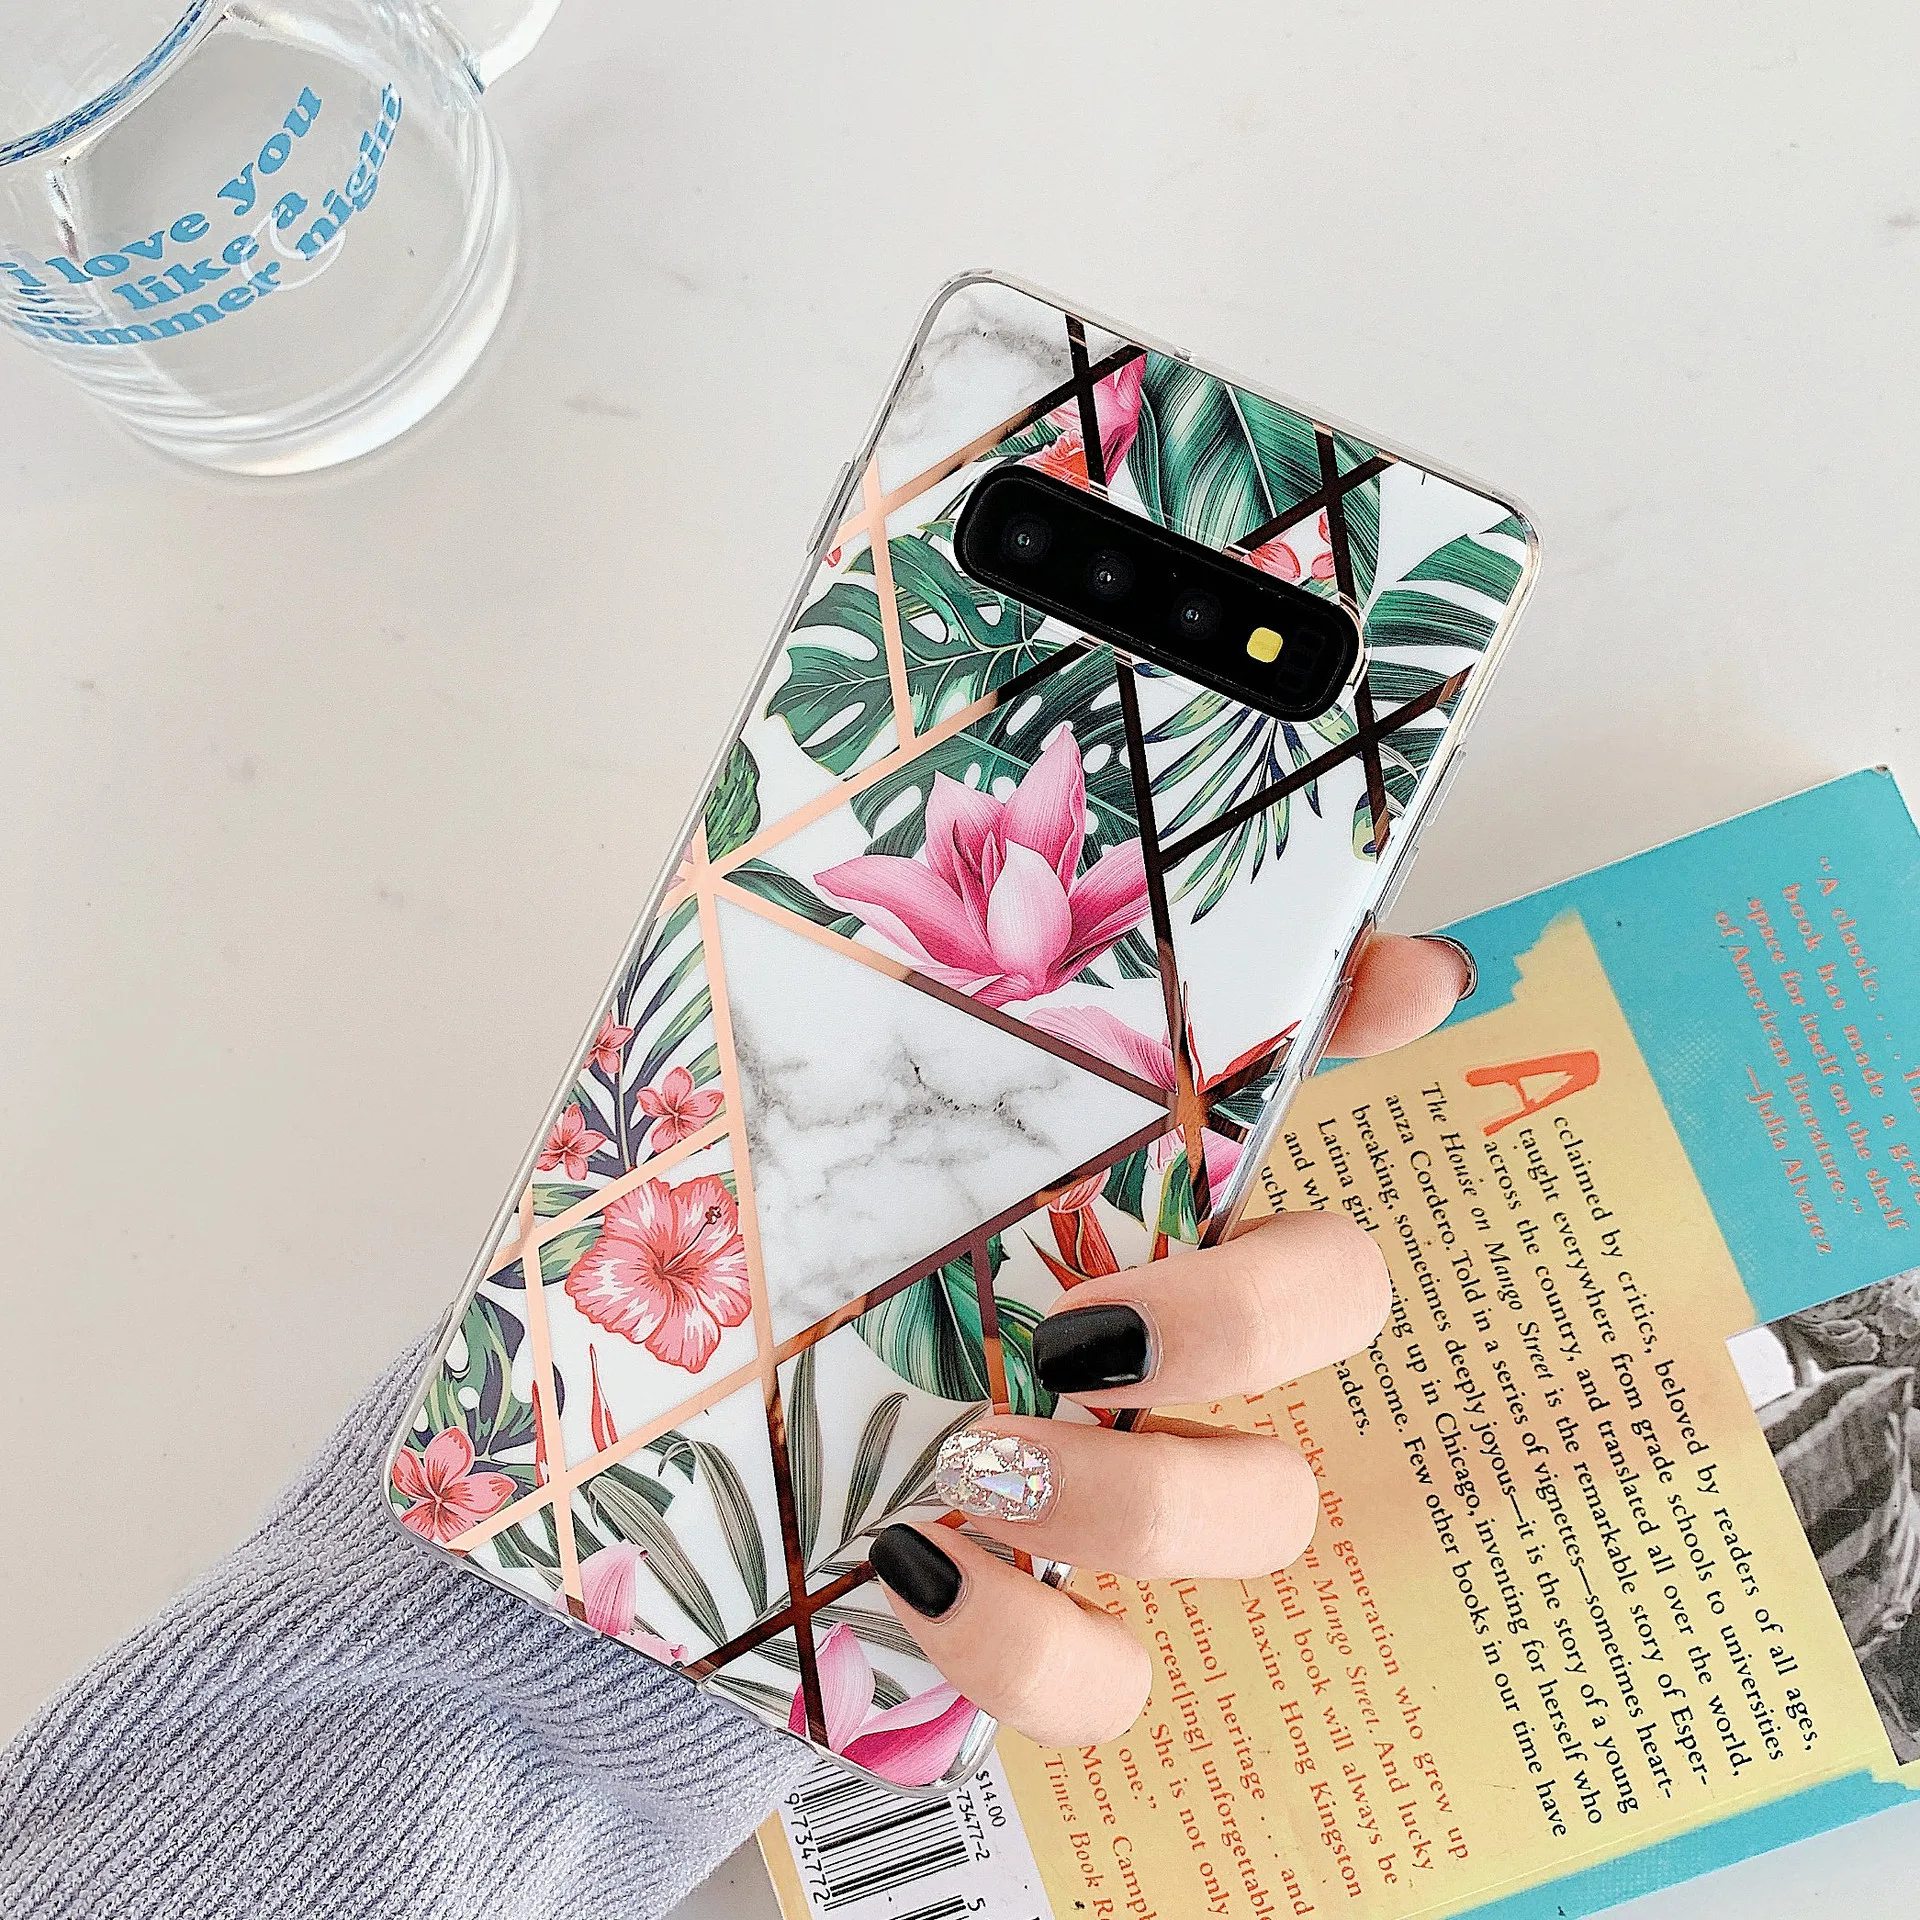 

Electroplated Flower Grass Marble Protective Case For Samsung Note 20 Ultra Note 10 Plus S20 Plus Ultra A51 A71 5G Protect Cover